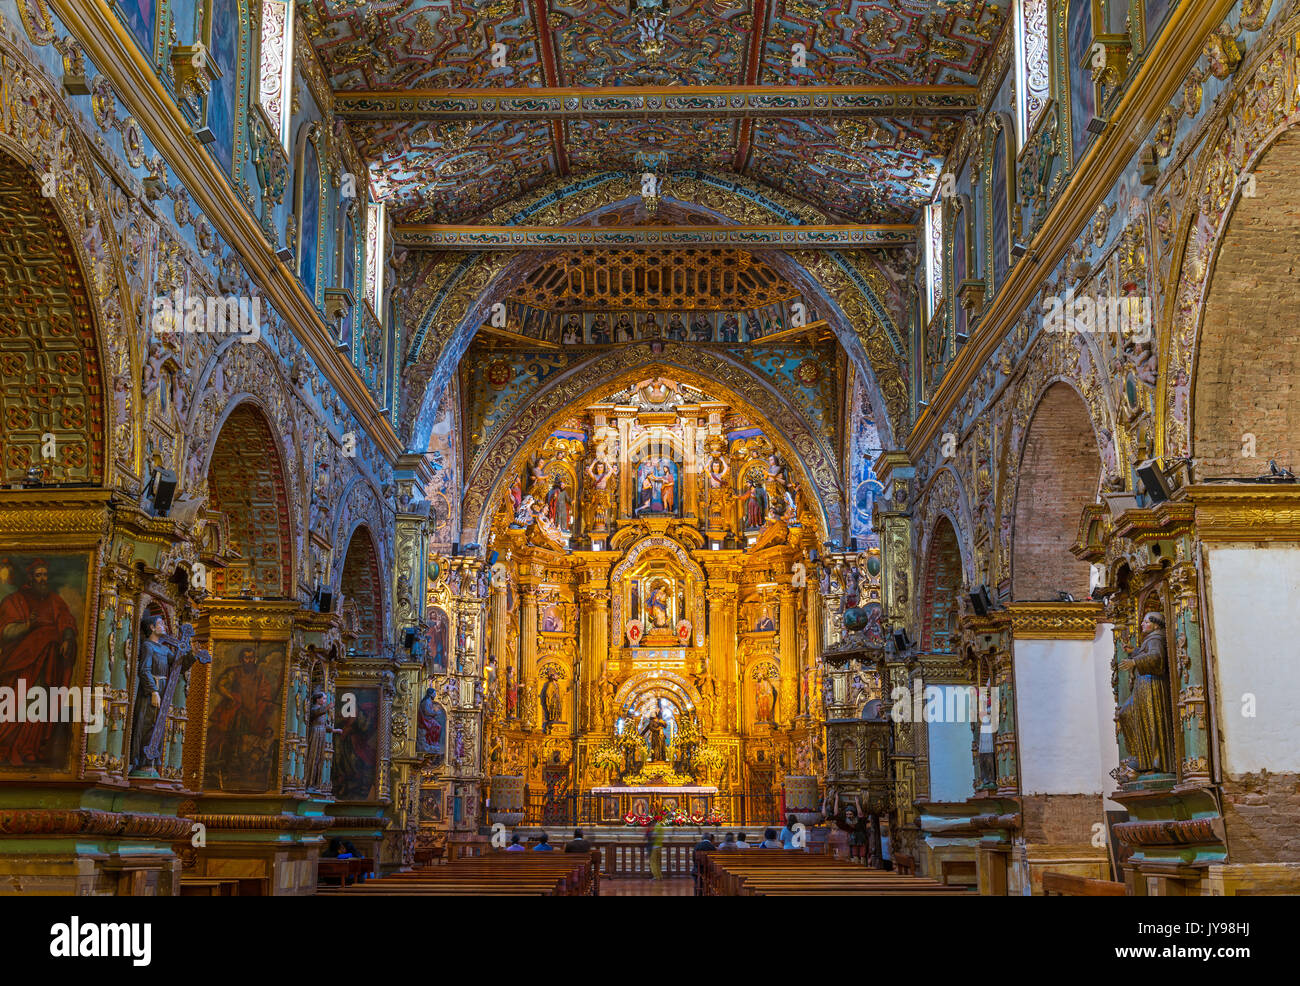 The baroque style and gold leaf decorated altar of the Saint Francis church and convent in the historic city center of Quito, Ecuador. Stock Photo